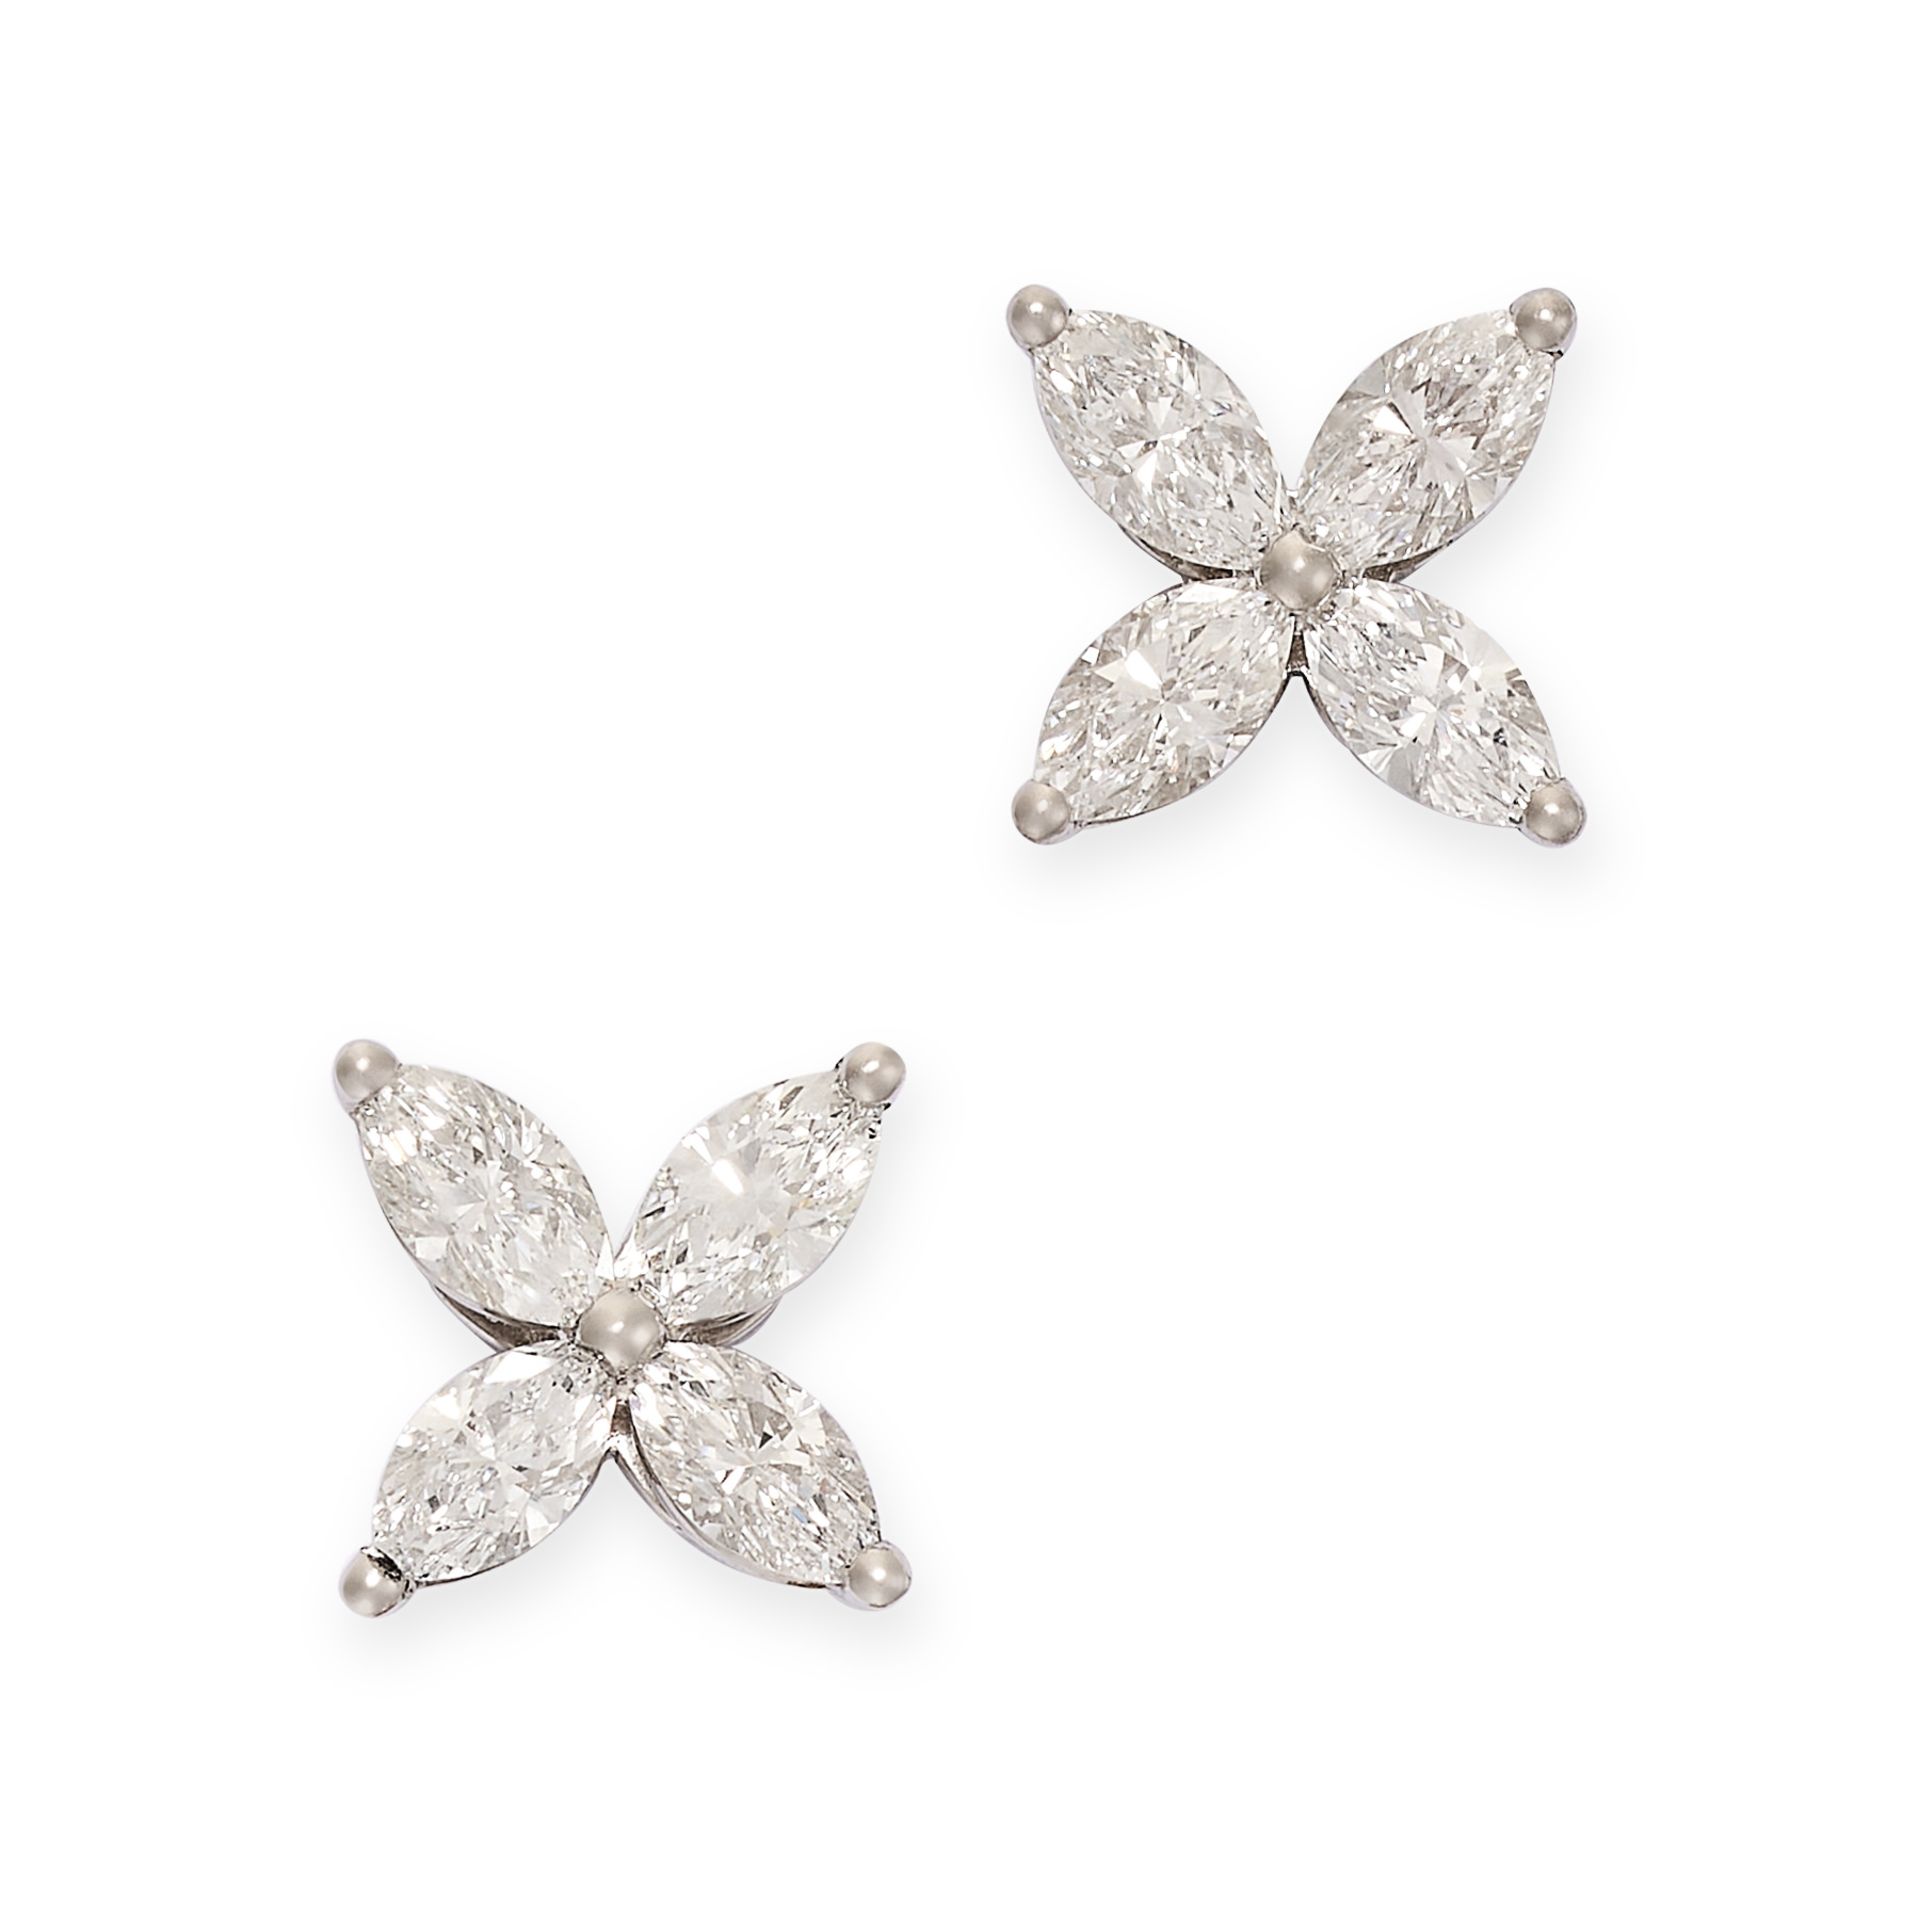 TIFFANY & CO, A PAIR OF VICTORIA DIAMOND STUD EARRINGS in platinum, medium size, each set with